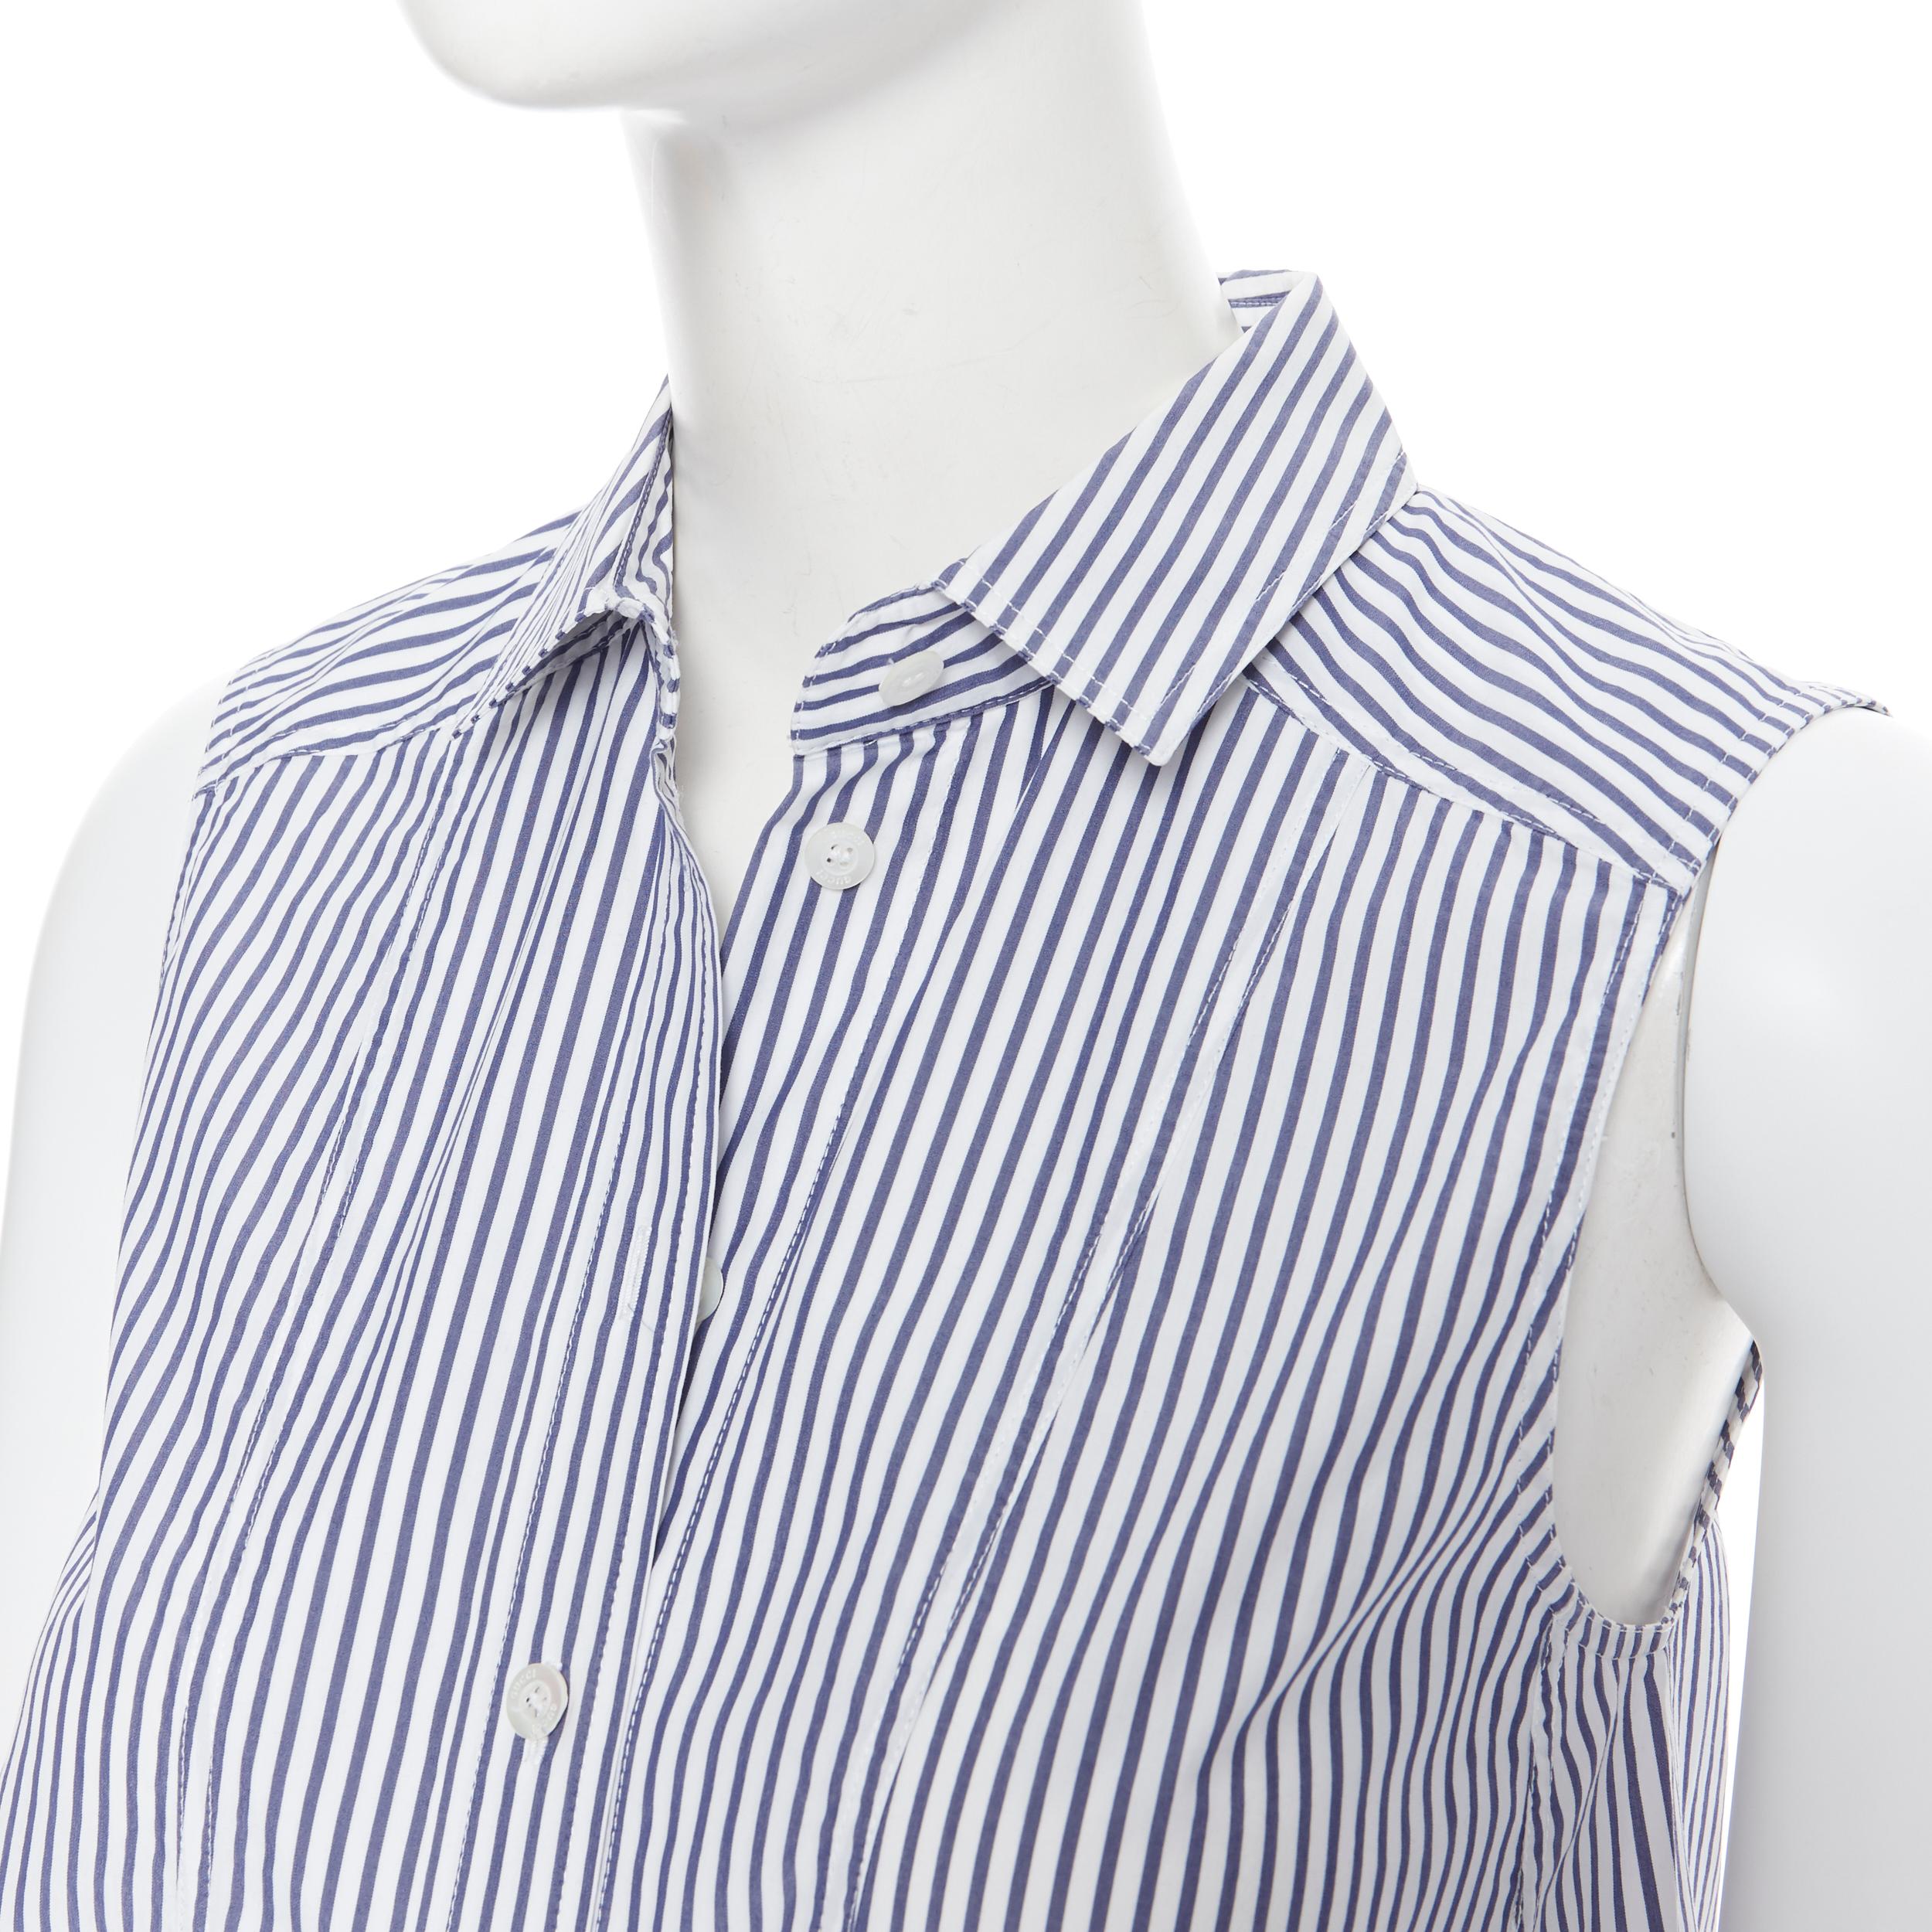 GUCCI 2009 cotton blend blue white stripe button down casual dress IT36 XS
Brand: Gucci
Model Name / Style: Shirt dress
Material: Cotton blend
Color: Navy, white
Pattern: Striped
Extra Detail: Button tab at lining to cinch at waist. Sleeveless.